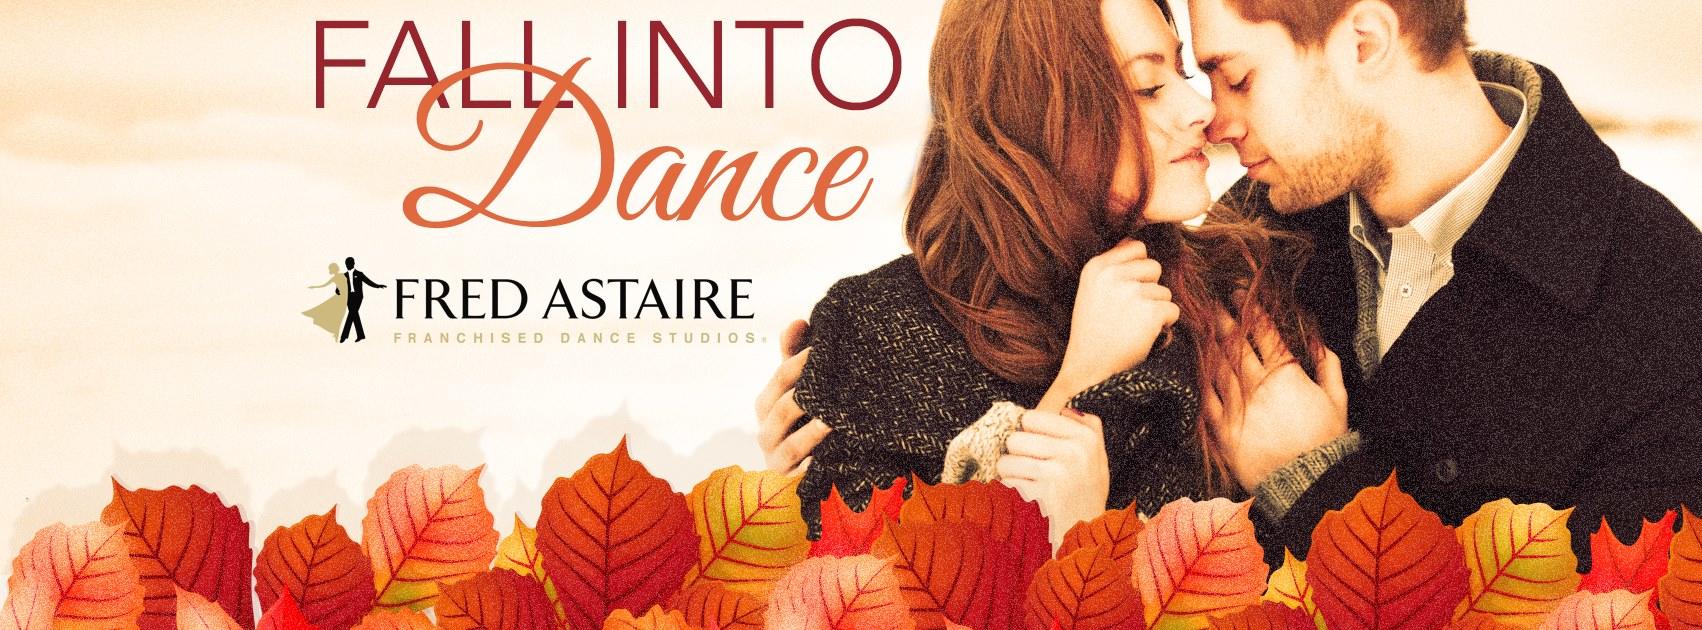 No matter what the Season, dancing at the Fred Astaire Dance Studios - Warwick is always a good thing!